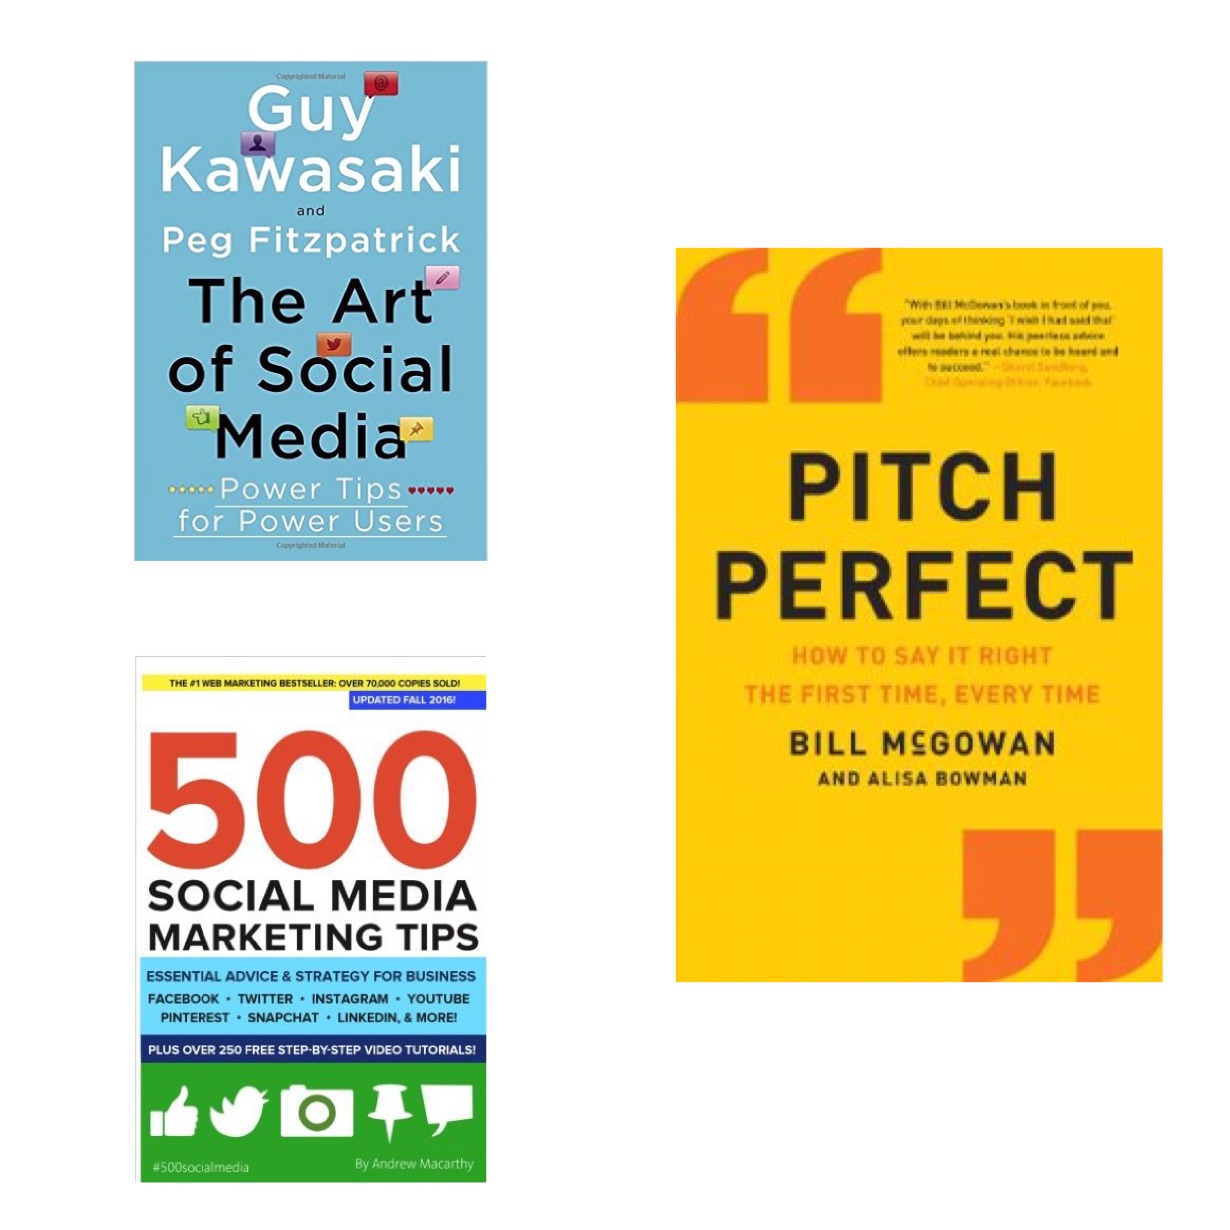 3 Great Books That Master PR, Marketing And Persuasion